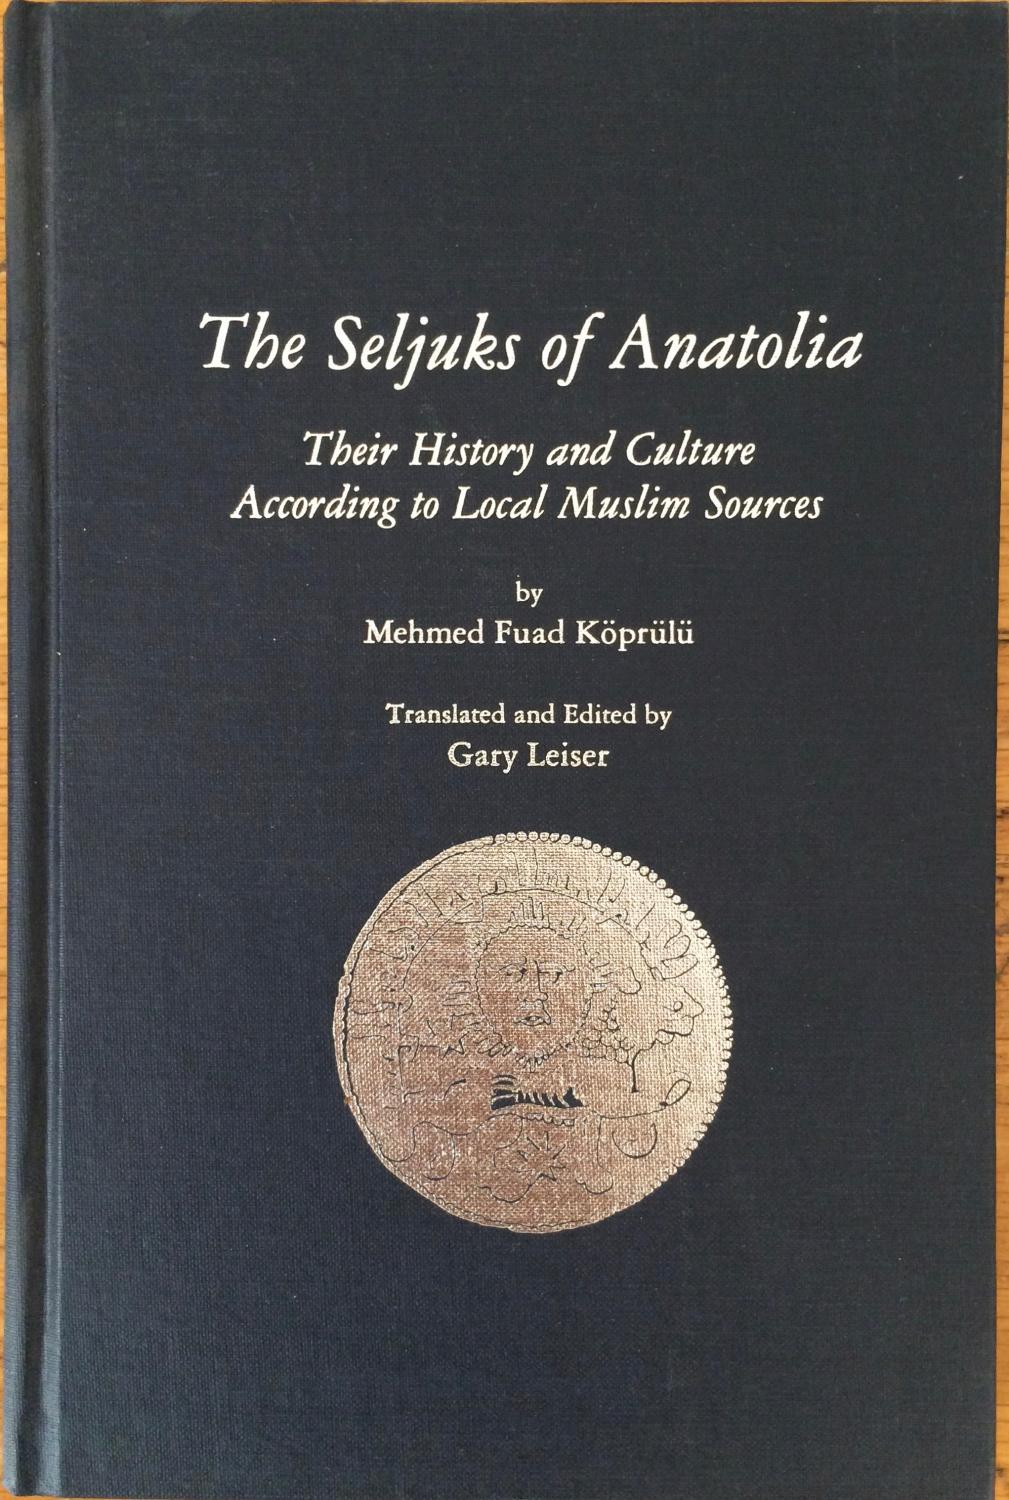 The Seljuks of Anatolia: Their History and Culture According to Local Muslim Sources - Koprulu, Mehmed Fuad